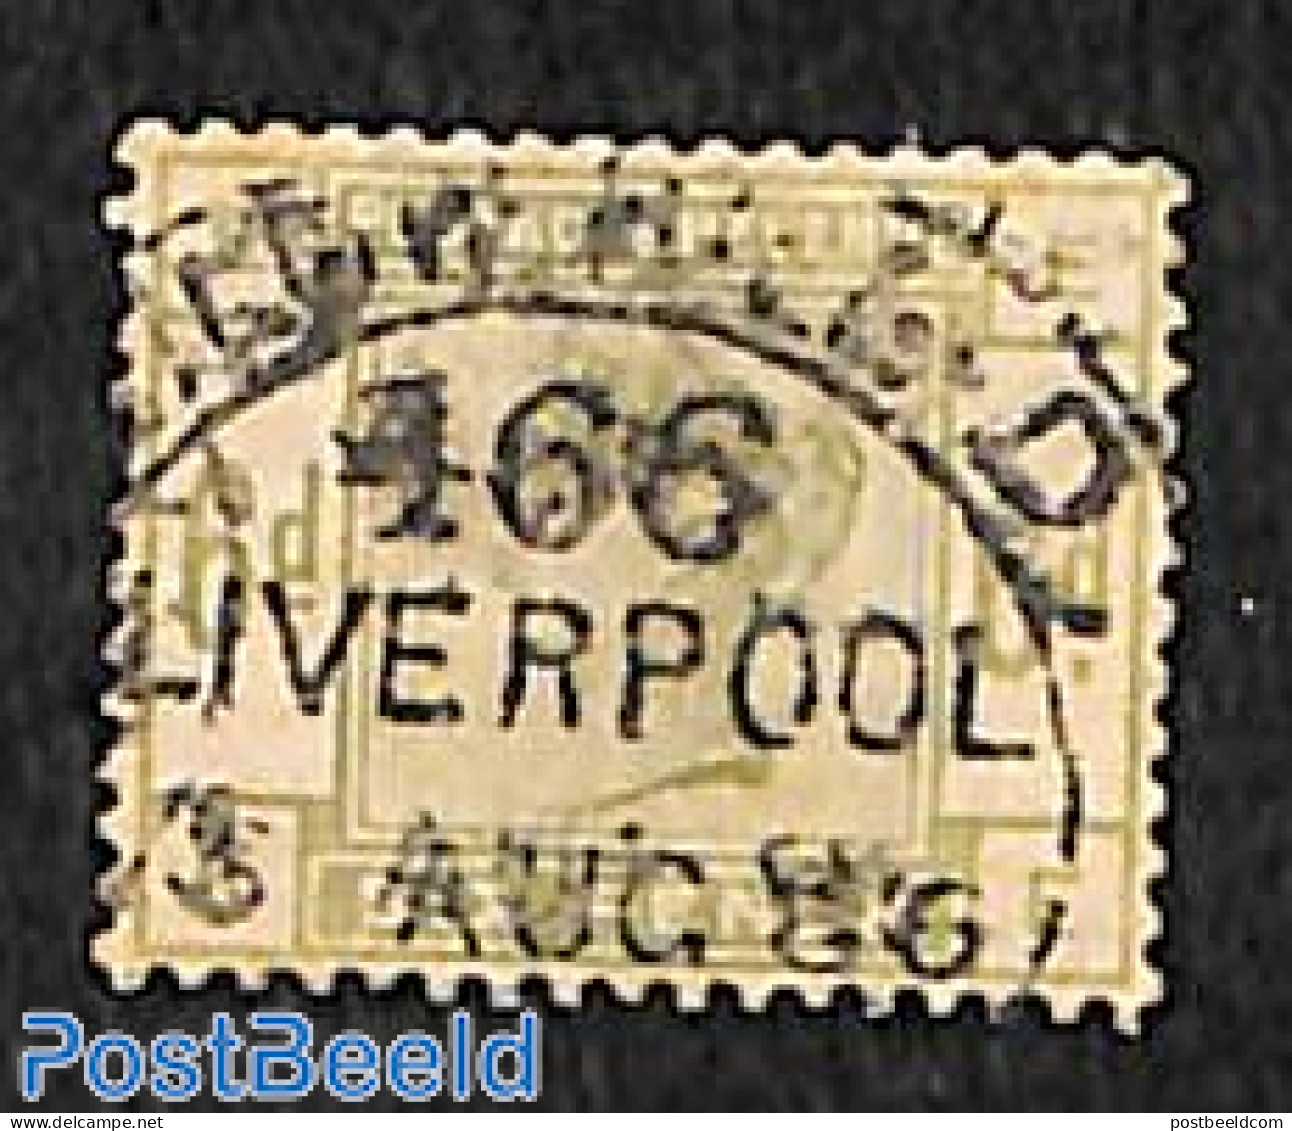 Great Britain 1883 6d, Used , Used Stamps - Used Stamps